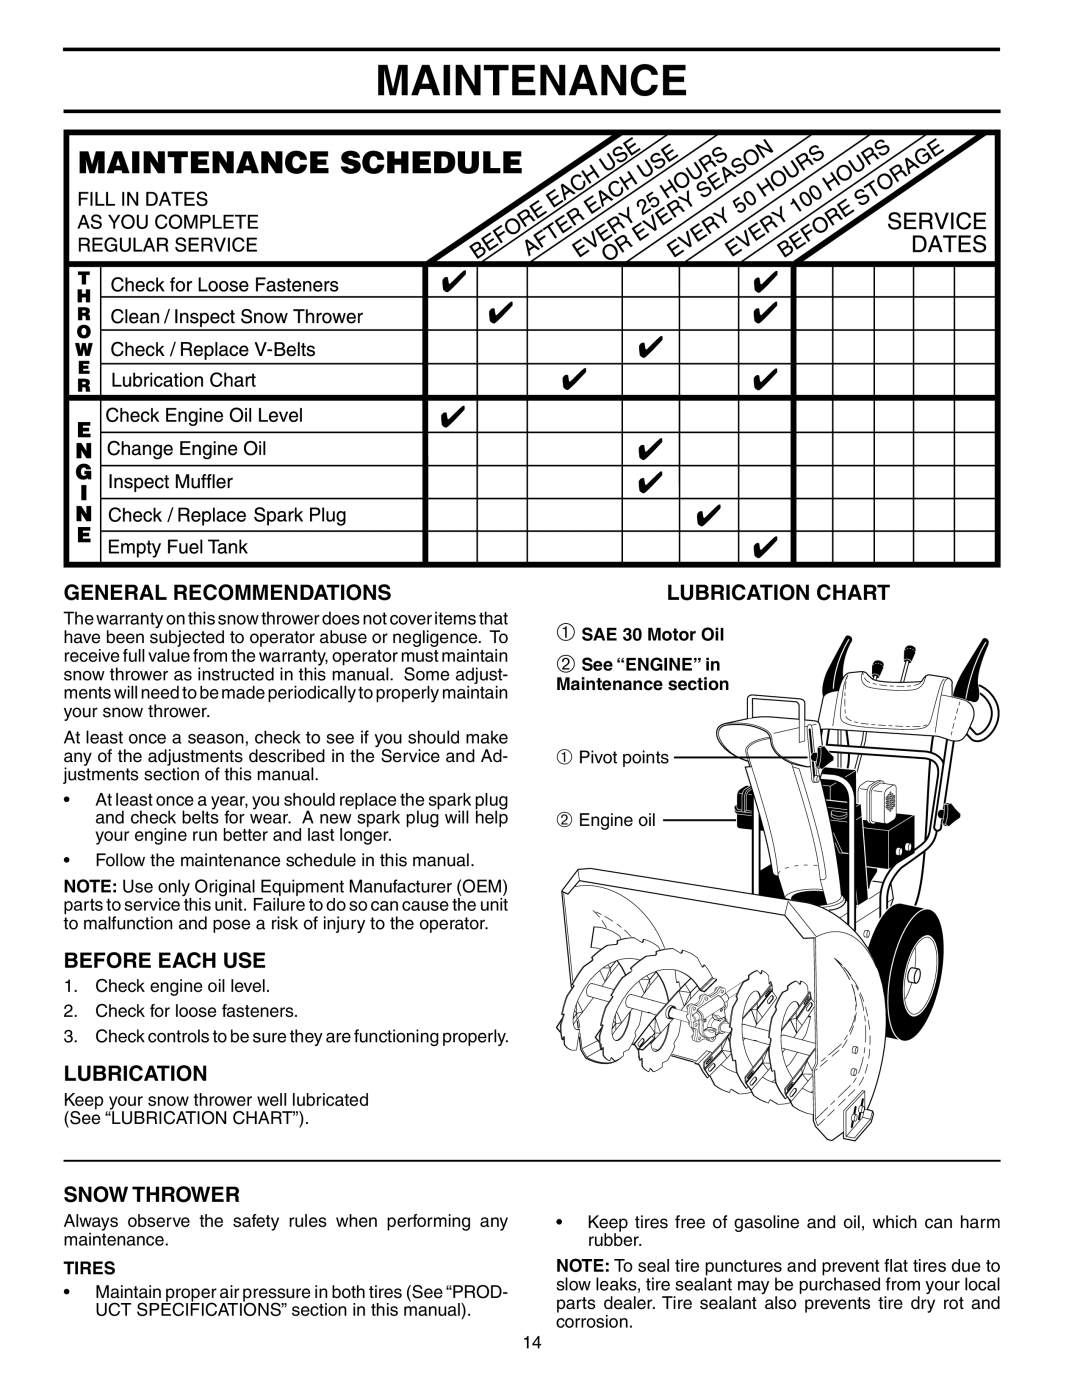 Husqvarna 524ST Maintenance, General Recommendations, Before Each Use, Snow Thrower, Lubrication Chart, Tires 